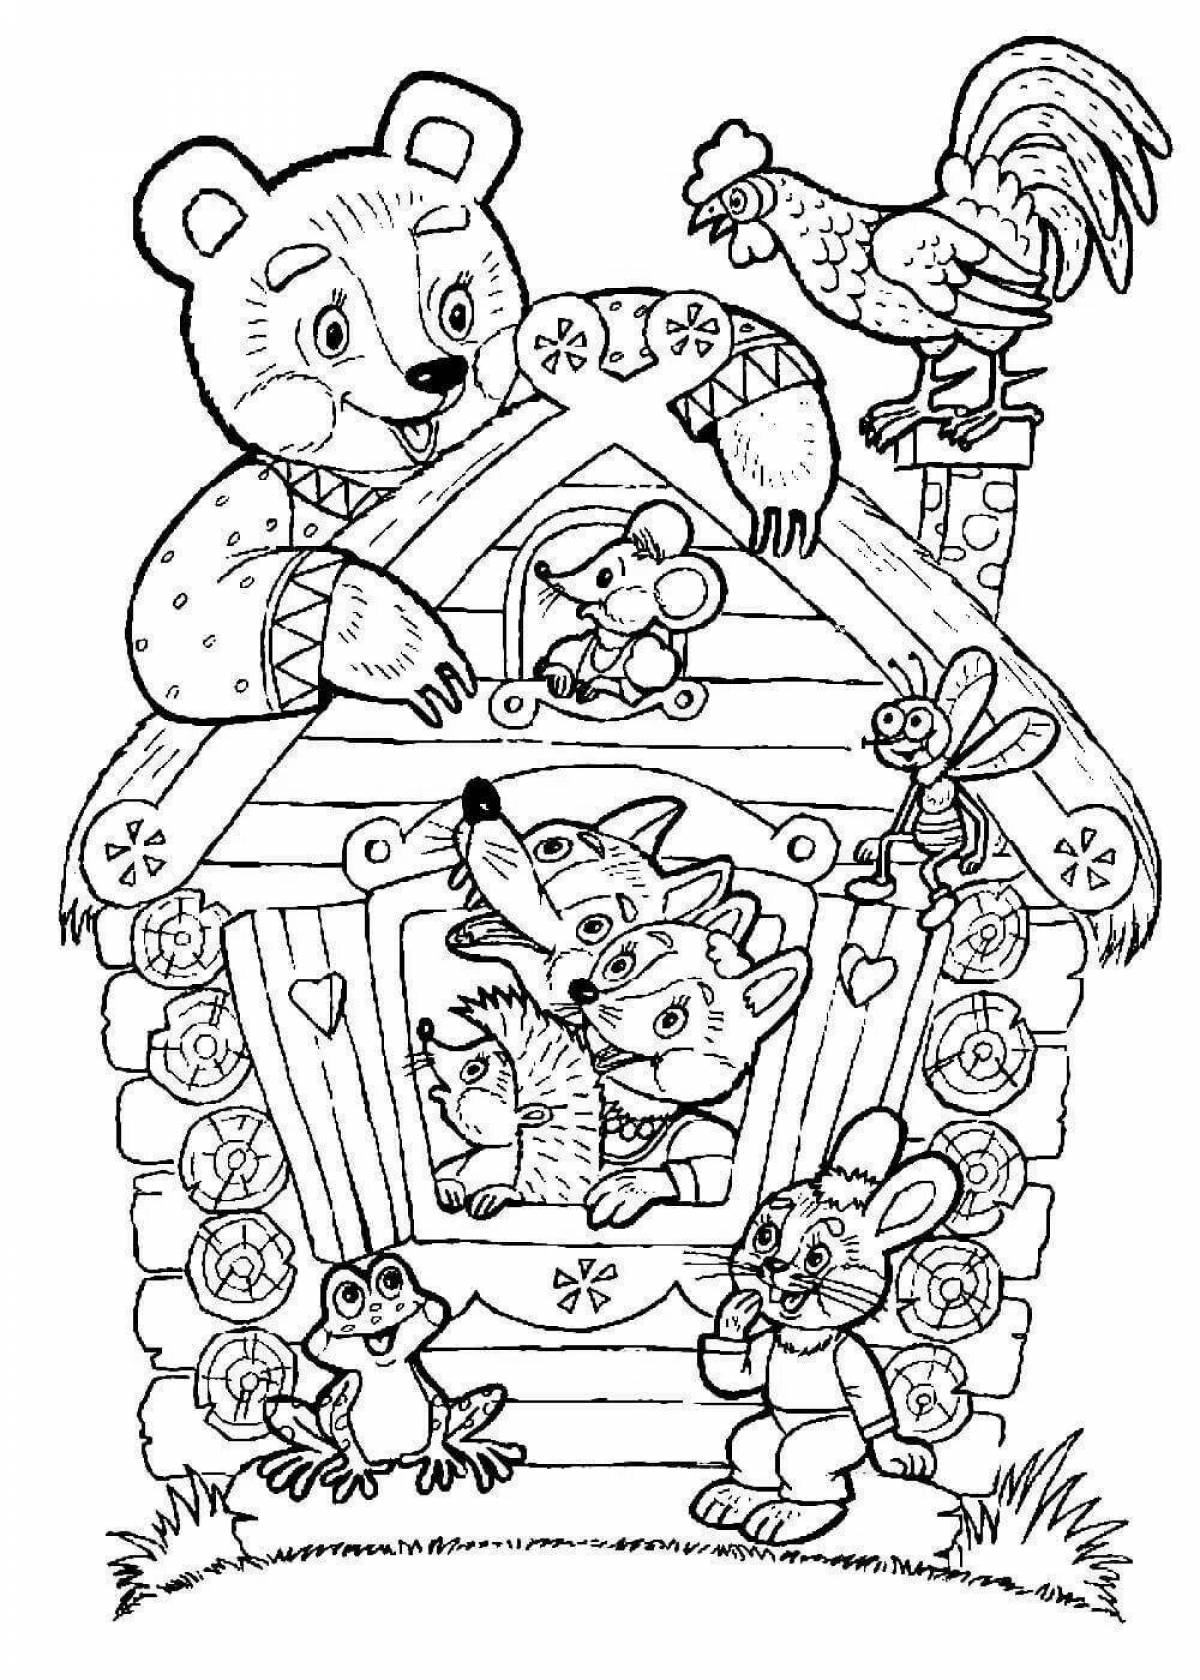 Colorful fairy tale coloring book for preschoolers